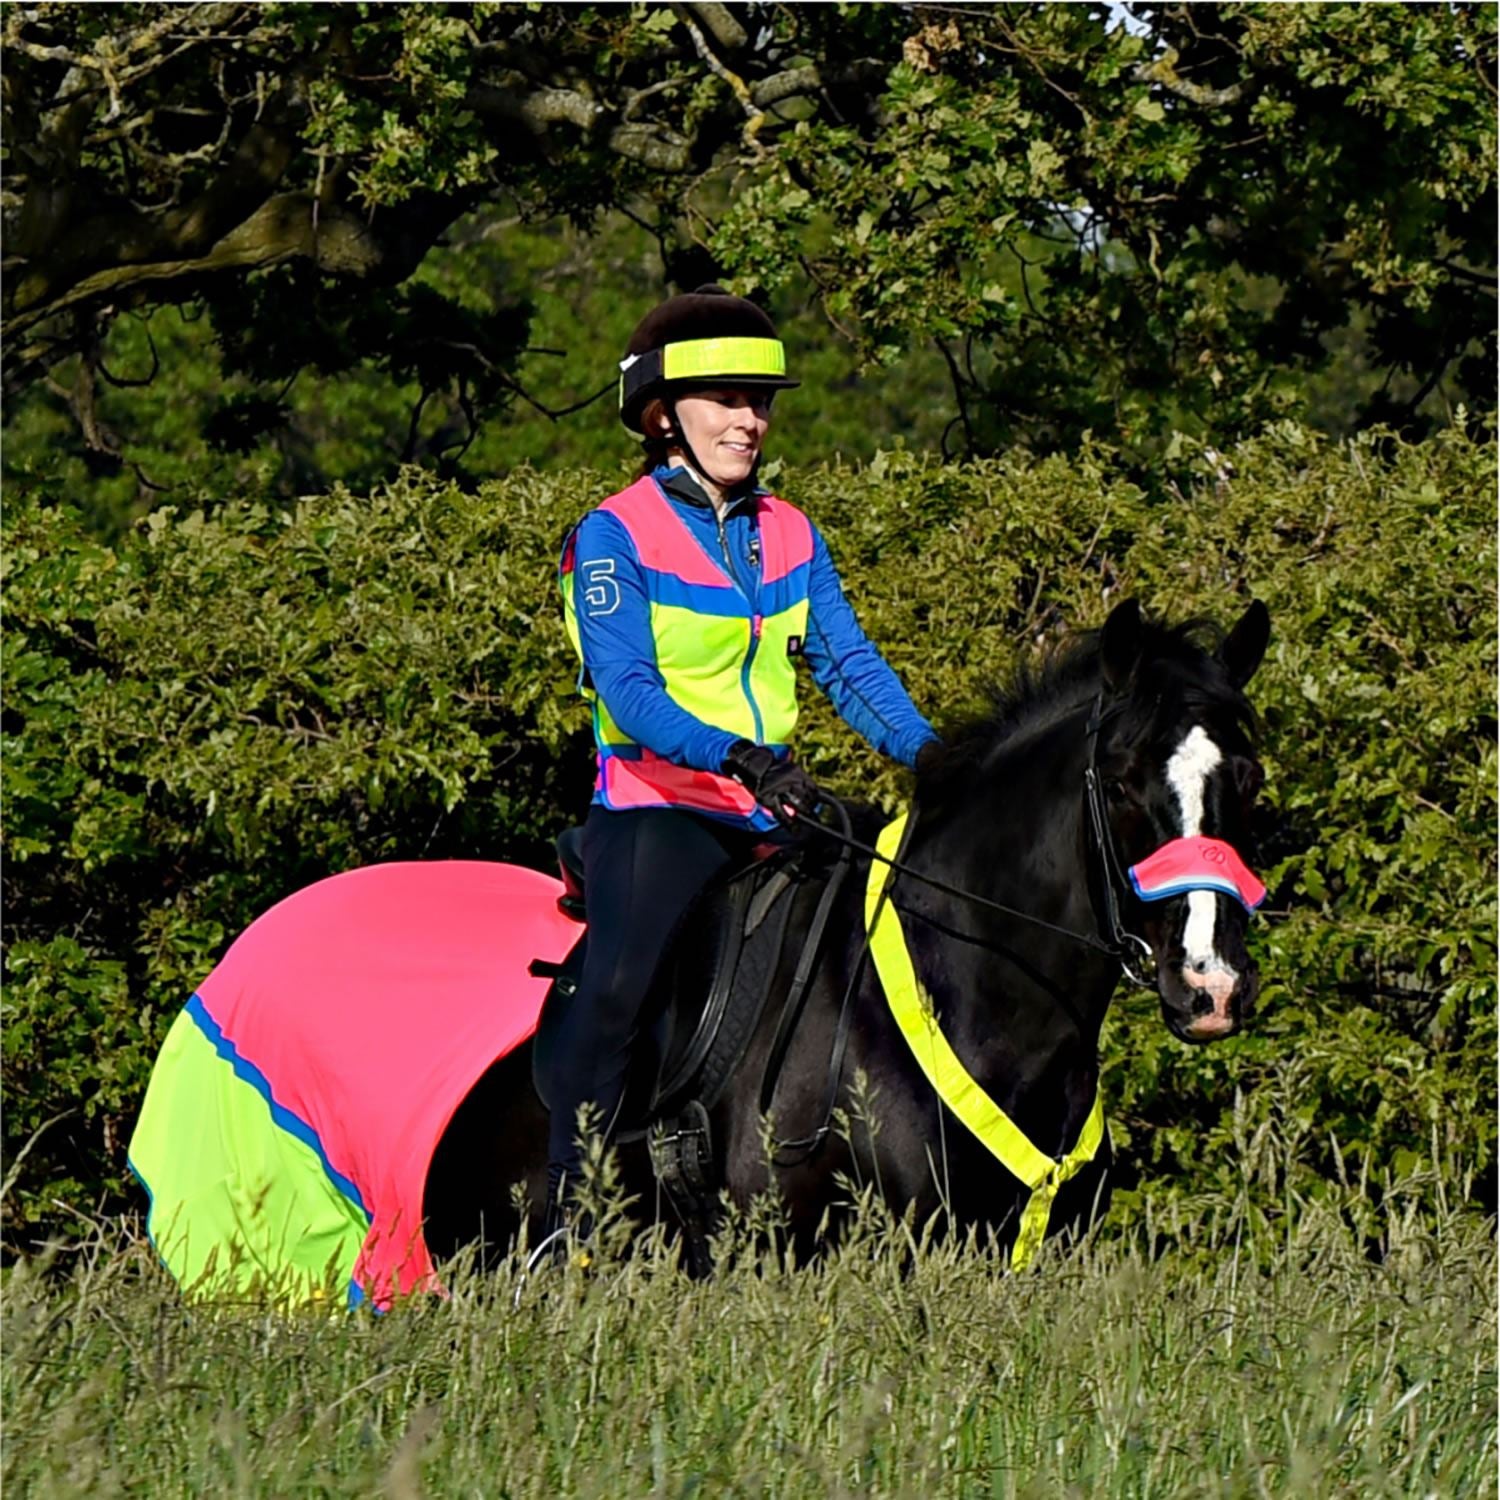 Equisafety Breathable Mesh Quarter Sheet - Just Horse Riders